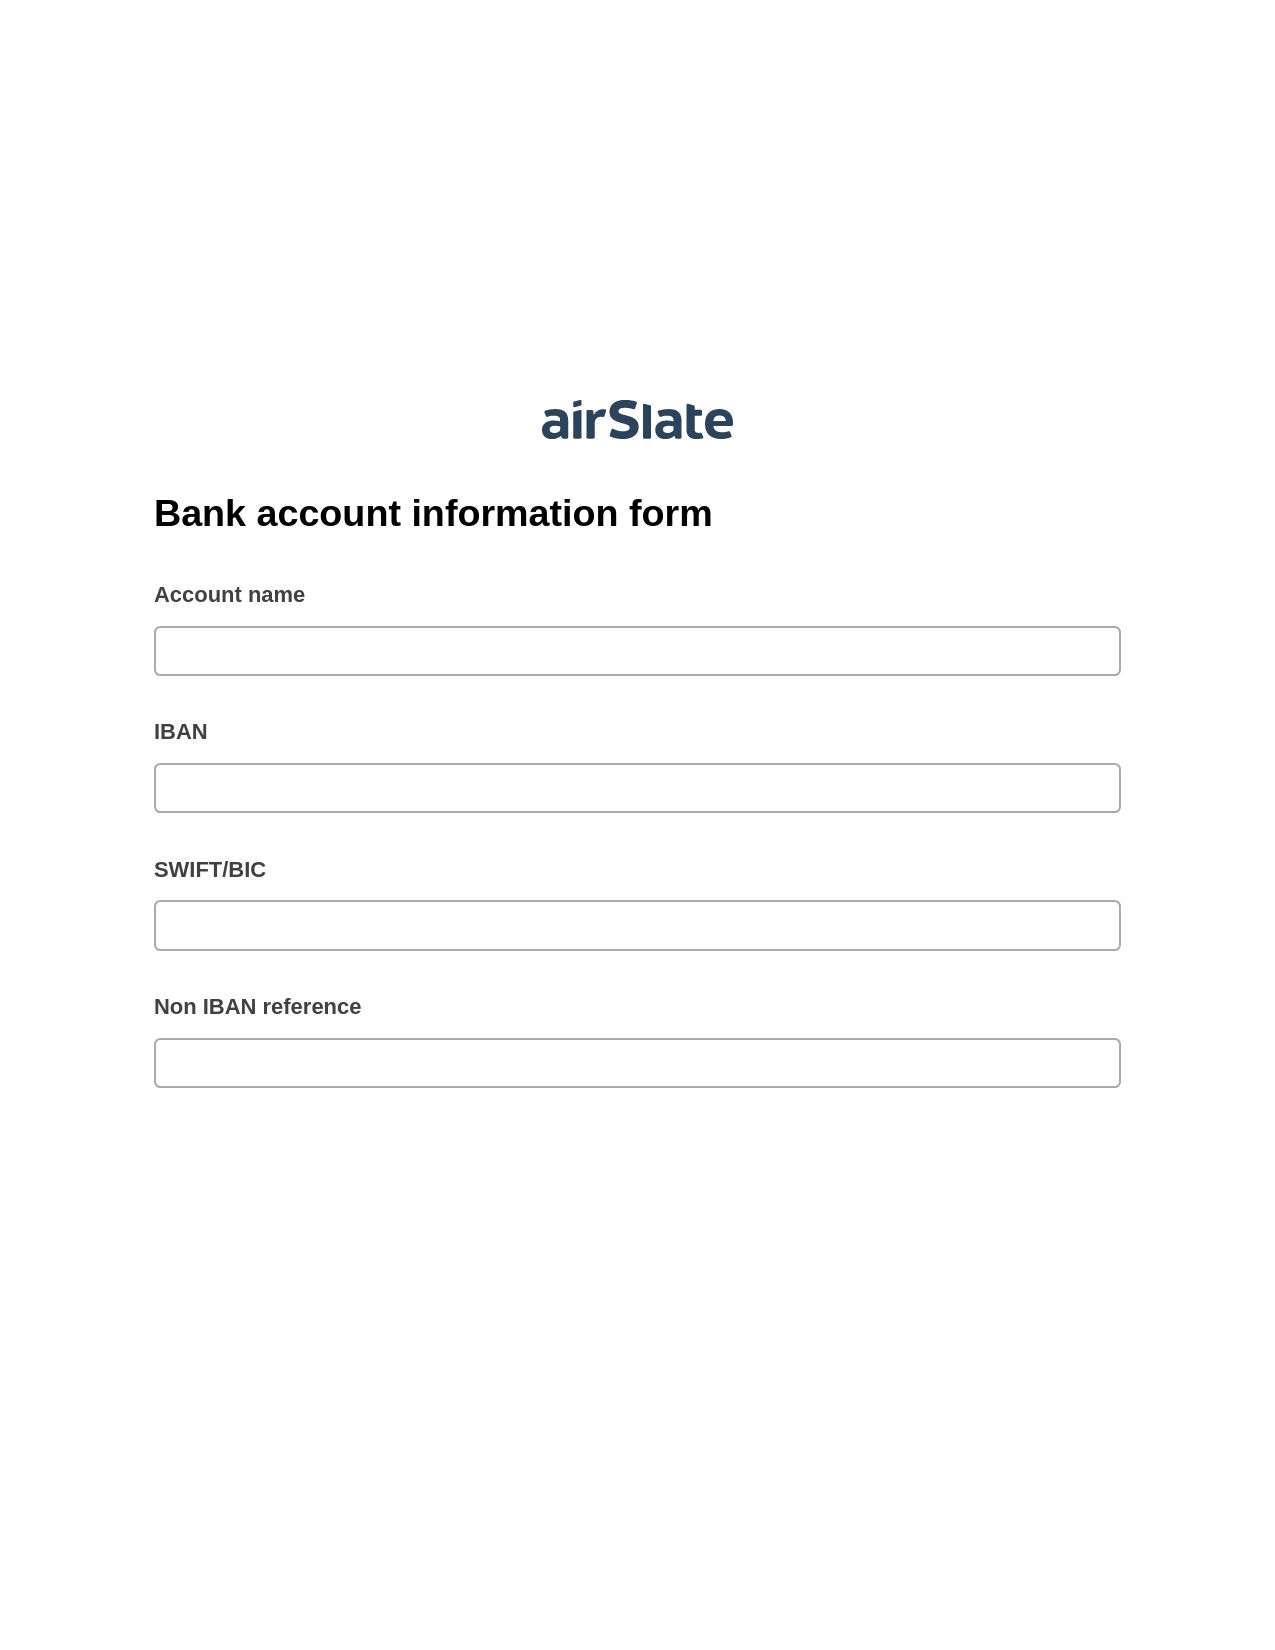 Multirole Bank account information form Pre-fill from Google Sheet Dropdown Options Bot, Open as Role Bot, Email Notification Postfinish Bot